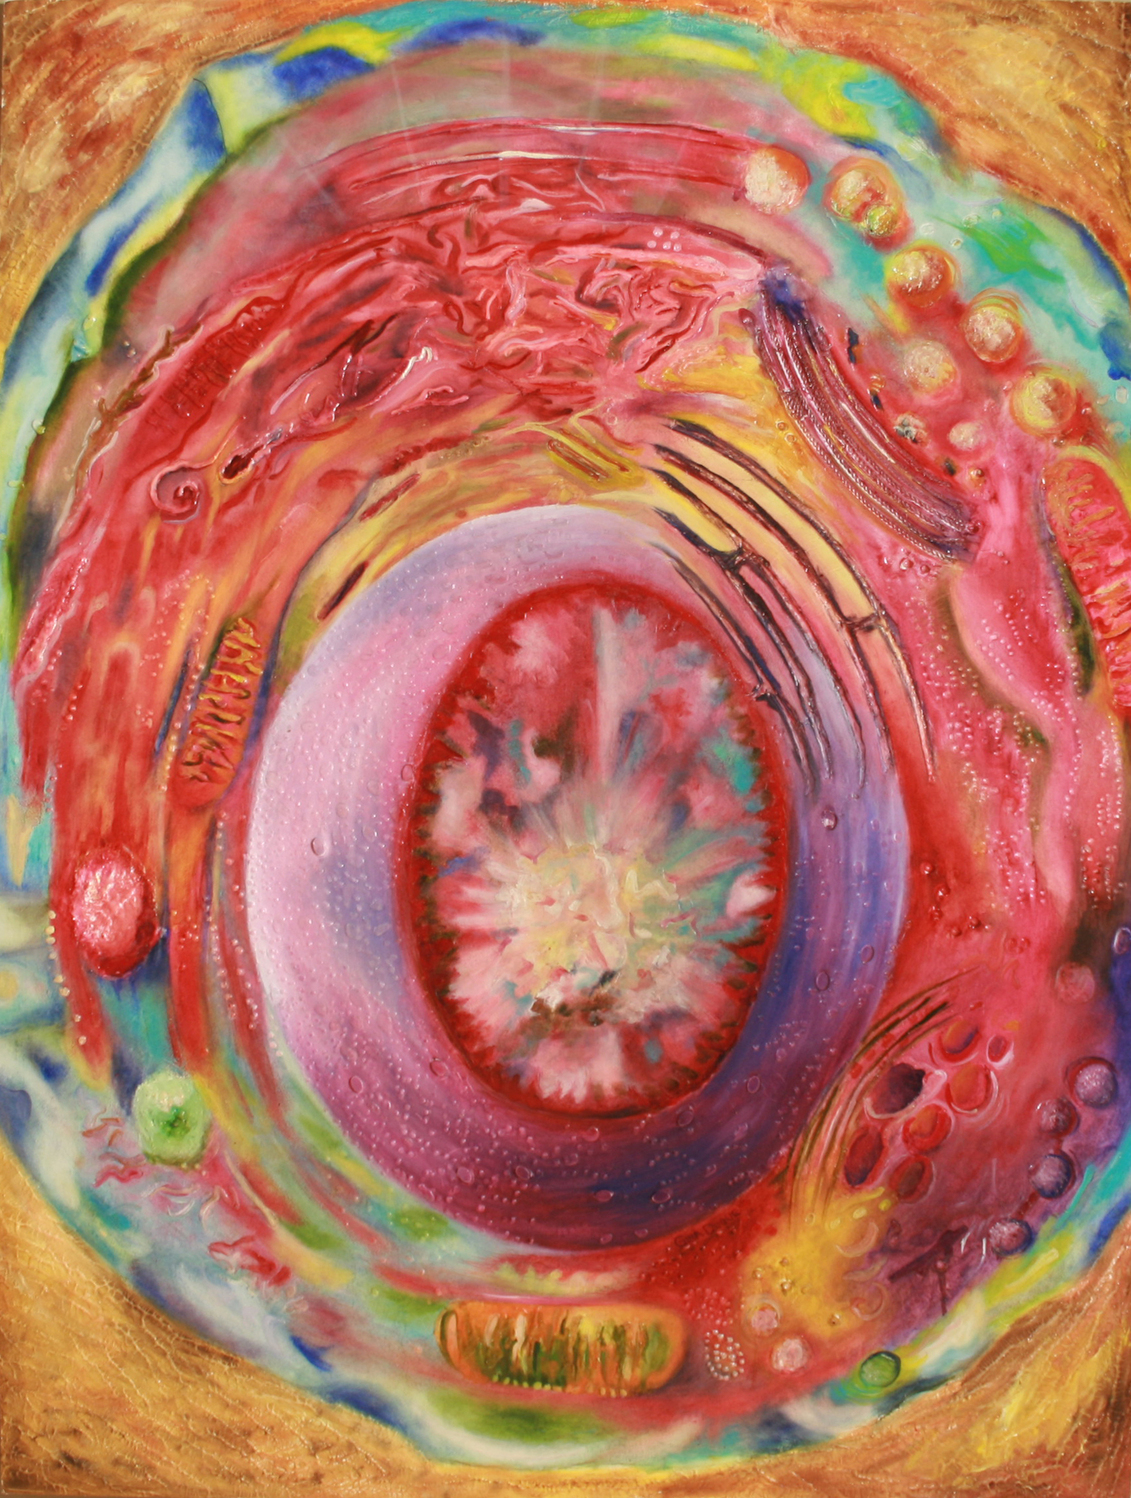 'Eukarya,' my first micrograph inspired artwork, created in 2011 in the midst of chemotherapy treatments.